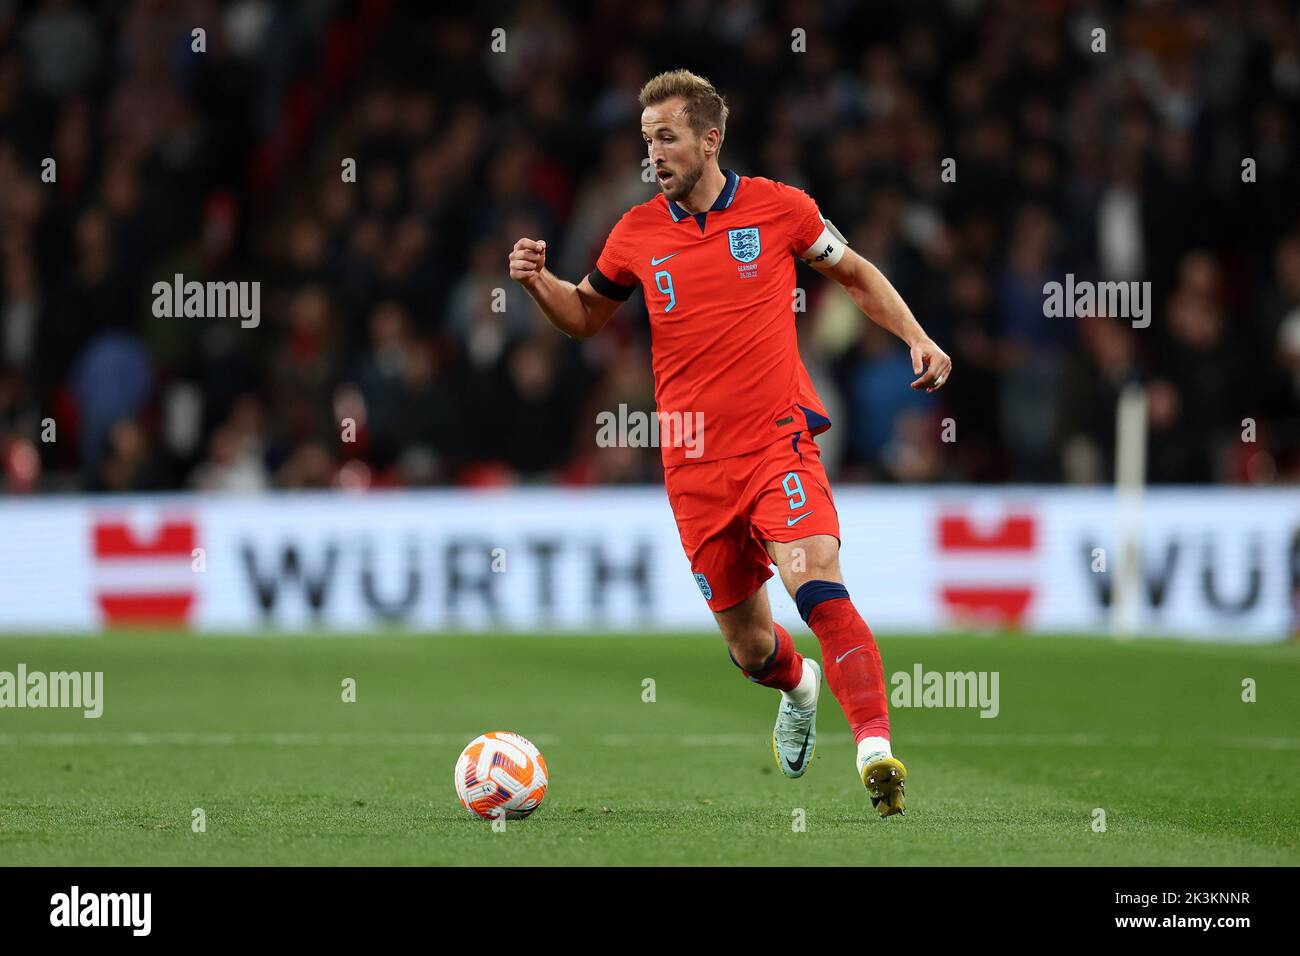 London, UK. 26th Sep, 2022. Harry Kane of England in action. England v Germany, UEFA Nations league International group C match at Wembley Stadium in London on Monday 26th September 2022. Editorial use only. pic by Andrew Orchard/Andrew Orchard sports photography/Alamy Live News Credit: Andrew Orchard sports photography/Alamy Live News Stock Photo